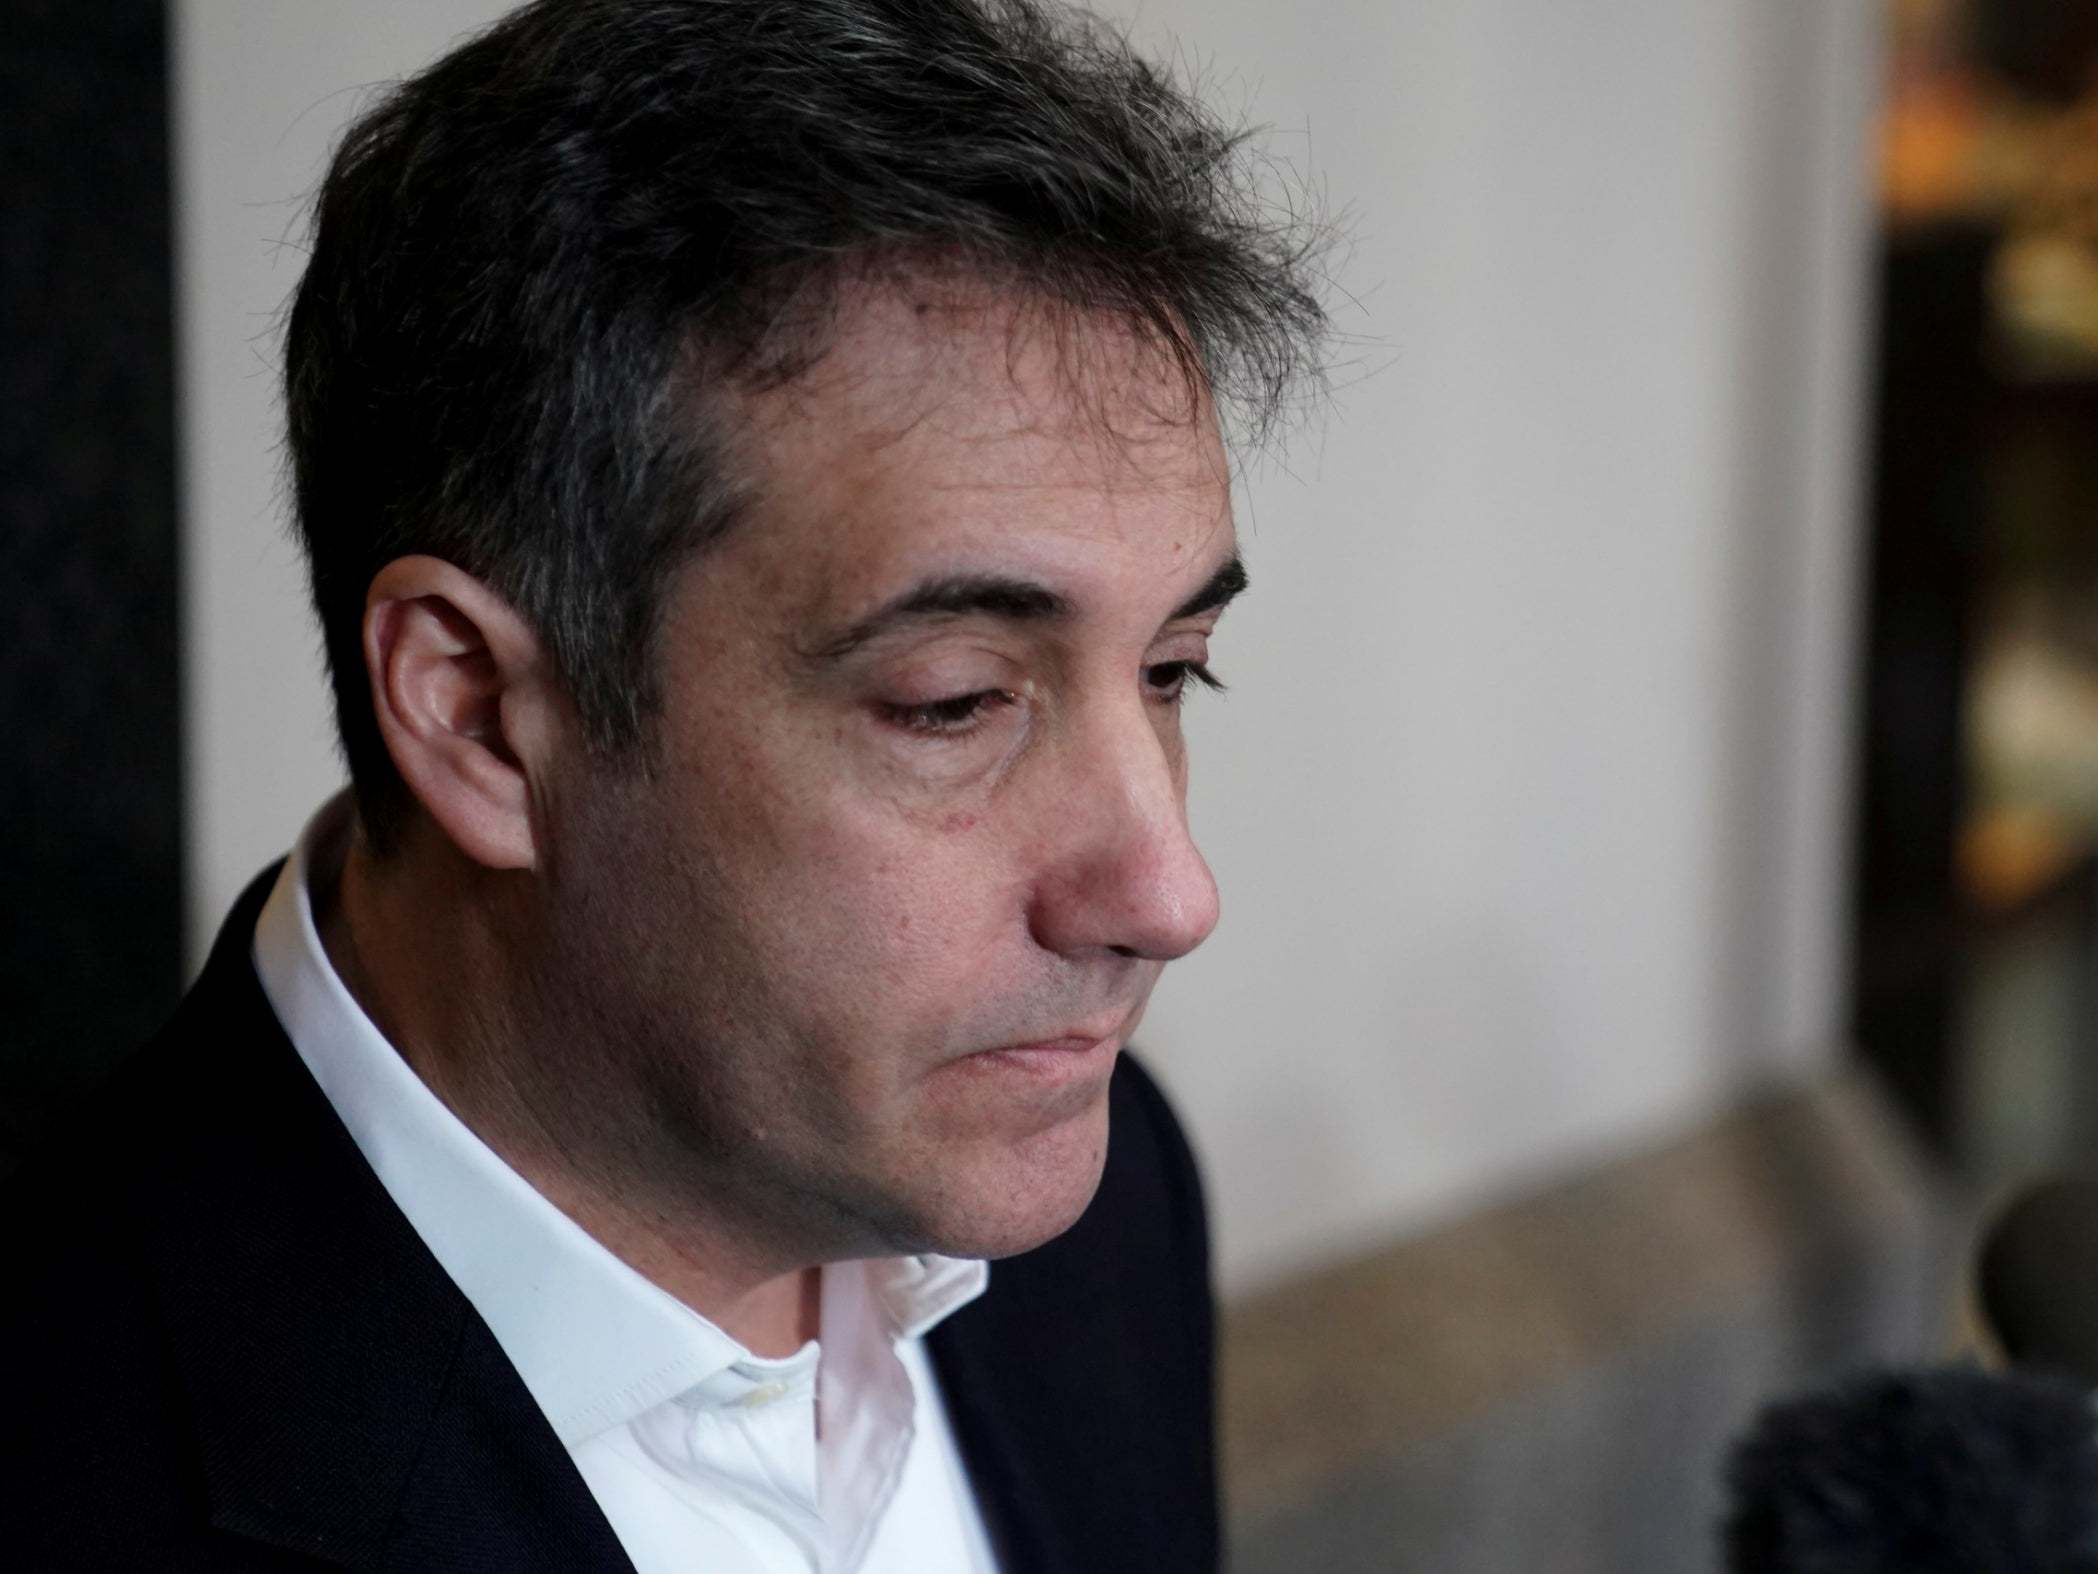 Donald Trump's former personal lawyer, Michael Cohen, is among hundreds of prisoners calling for early release due to coronavirus